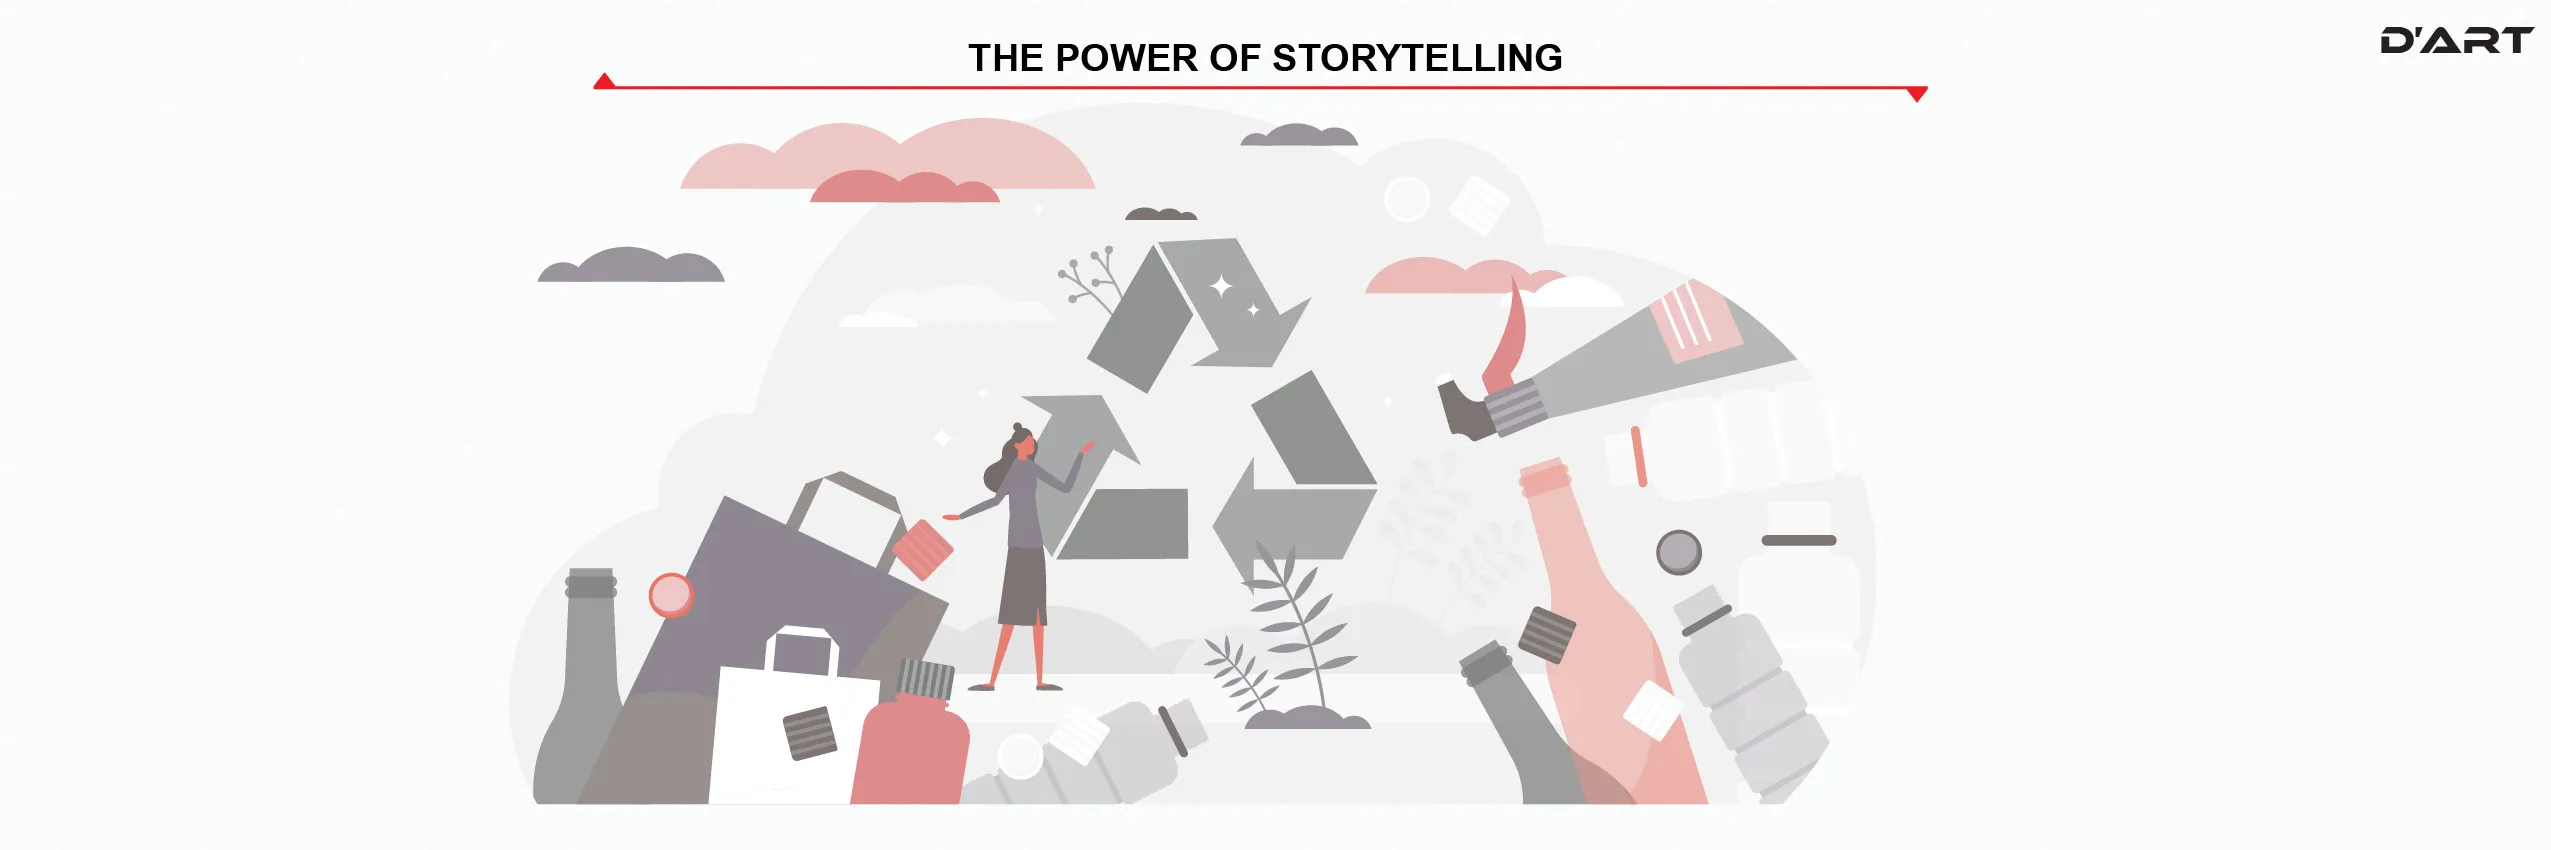 THE POWER OF STORYTELLING